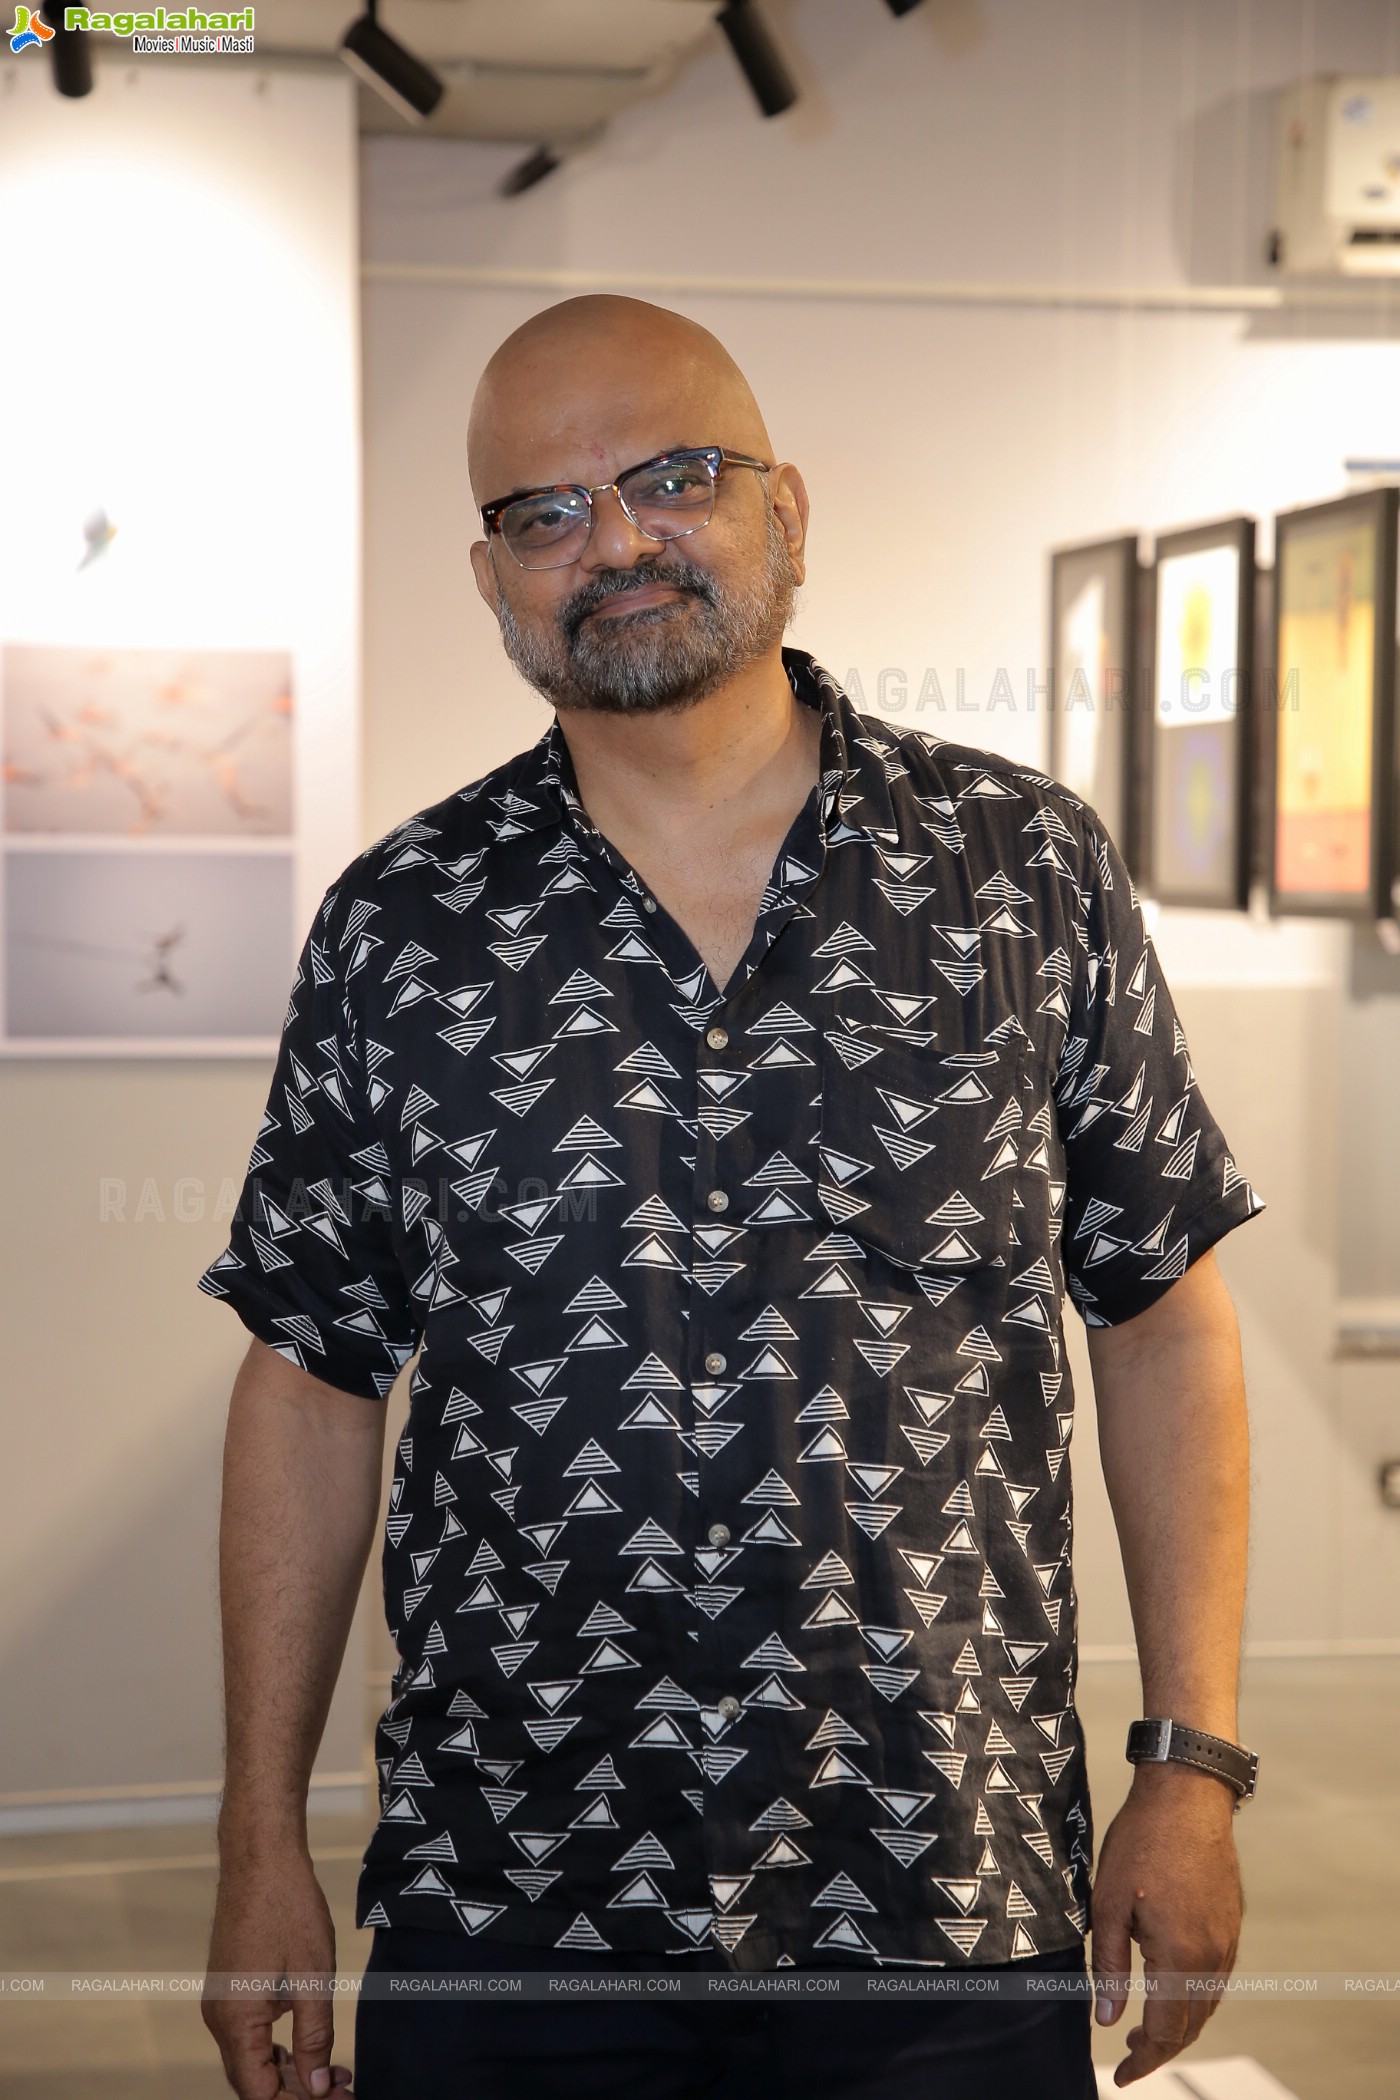 Hamstech's PIXEL Perfect 2022 Annual Photo Exhibition at Nagarjuna Hills Campus